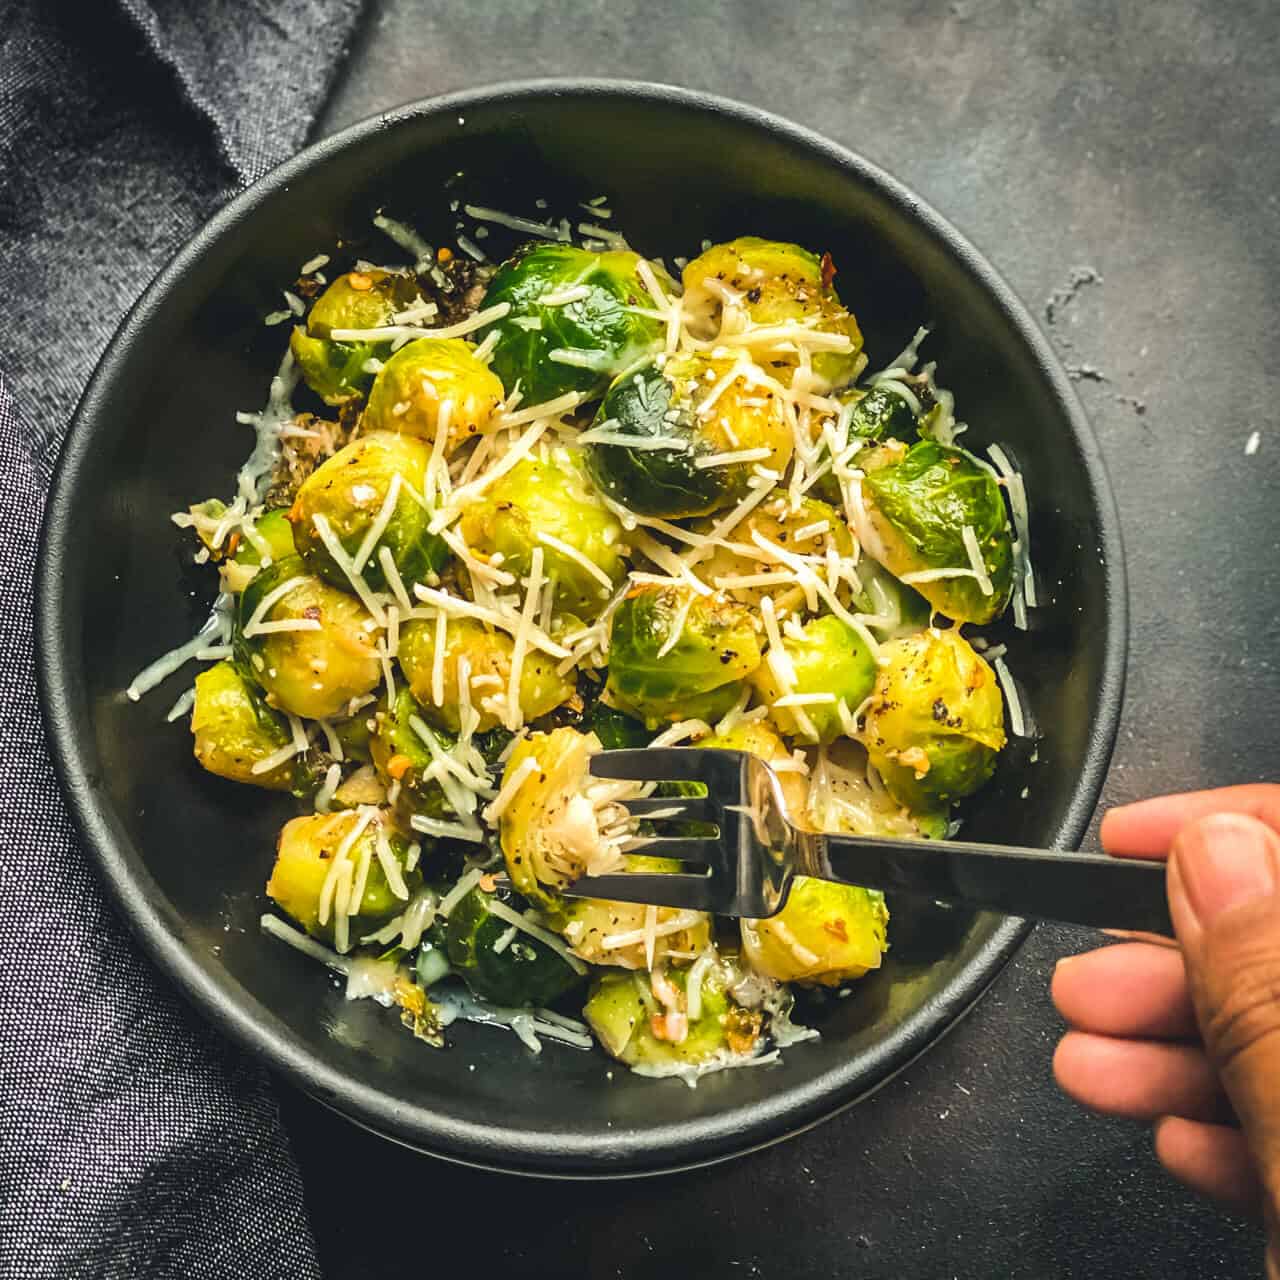 A black bowl with steamed and sautéed Brussel sprouts topped with cheese and a silver fork being poked into the bowl on a grey counter.